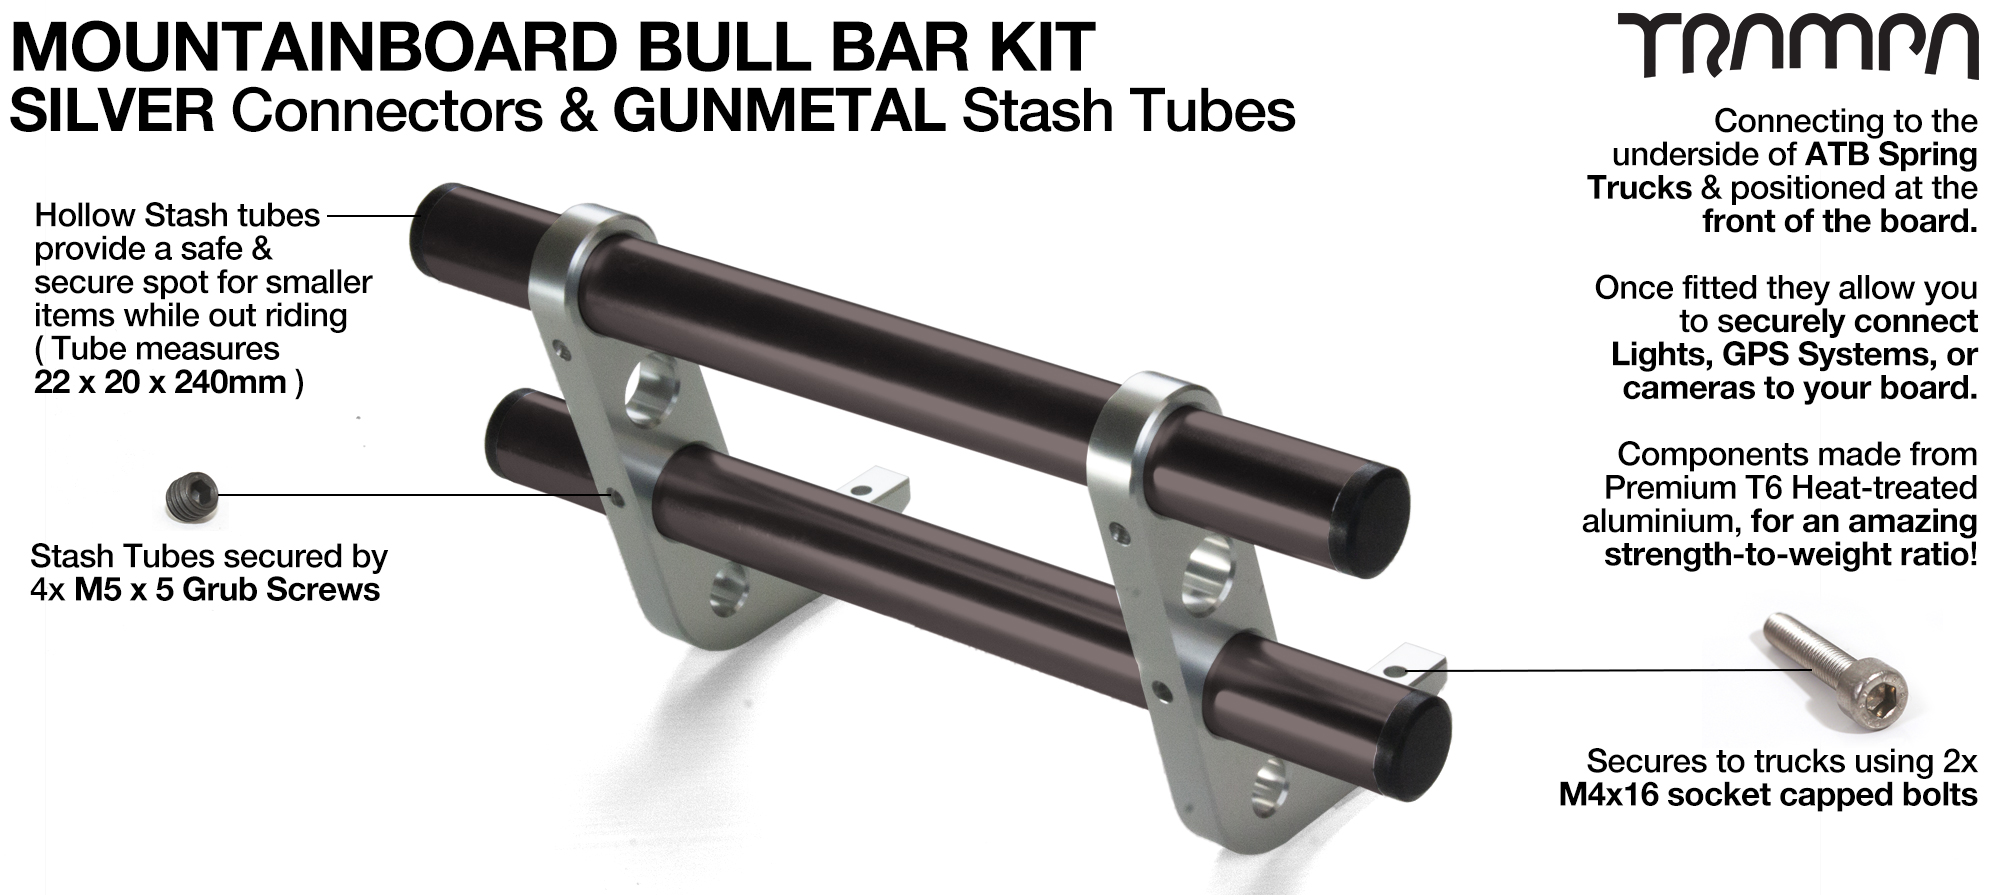 SILVER Uprights & GUNMETAL Crossbar BULL BARS for MOUNTAINBOARDS T6 Heat Treated CNC'd Aluminium Uprights, with Hollow Aluminium Stash Tubes with Rubber end bungs 